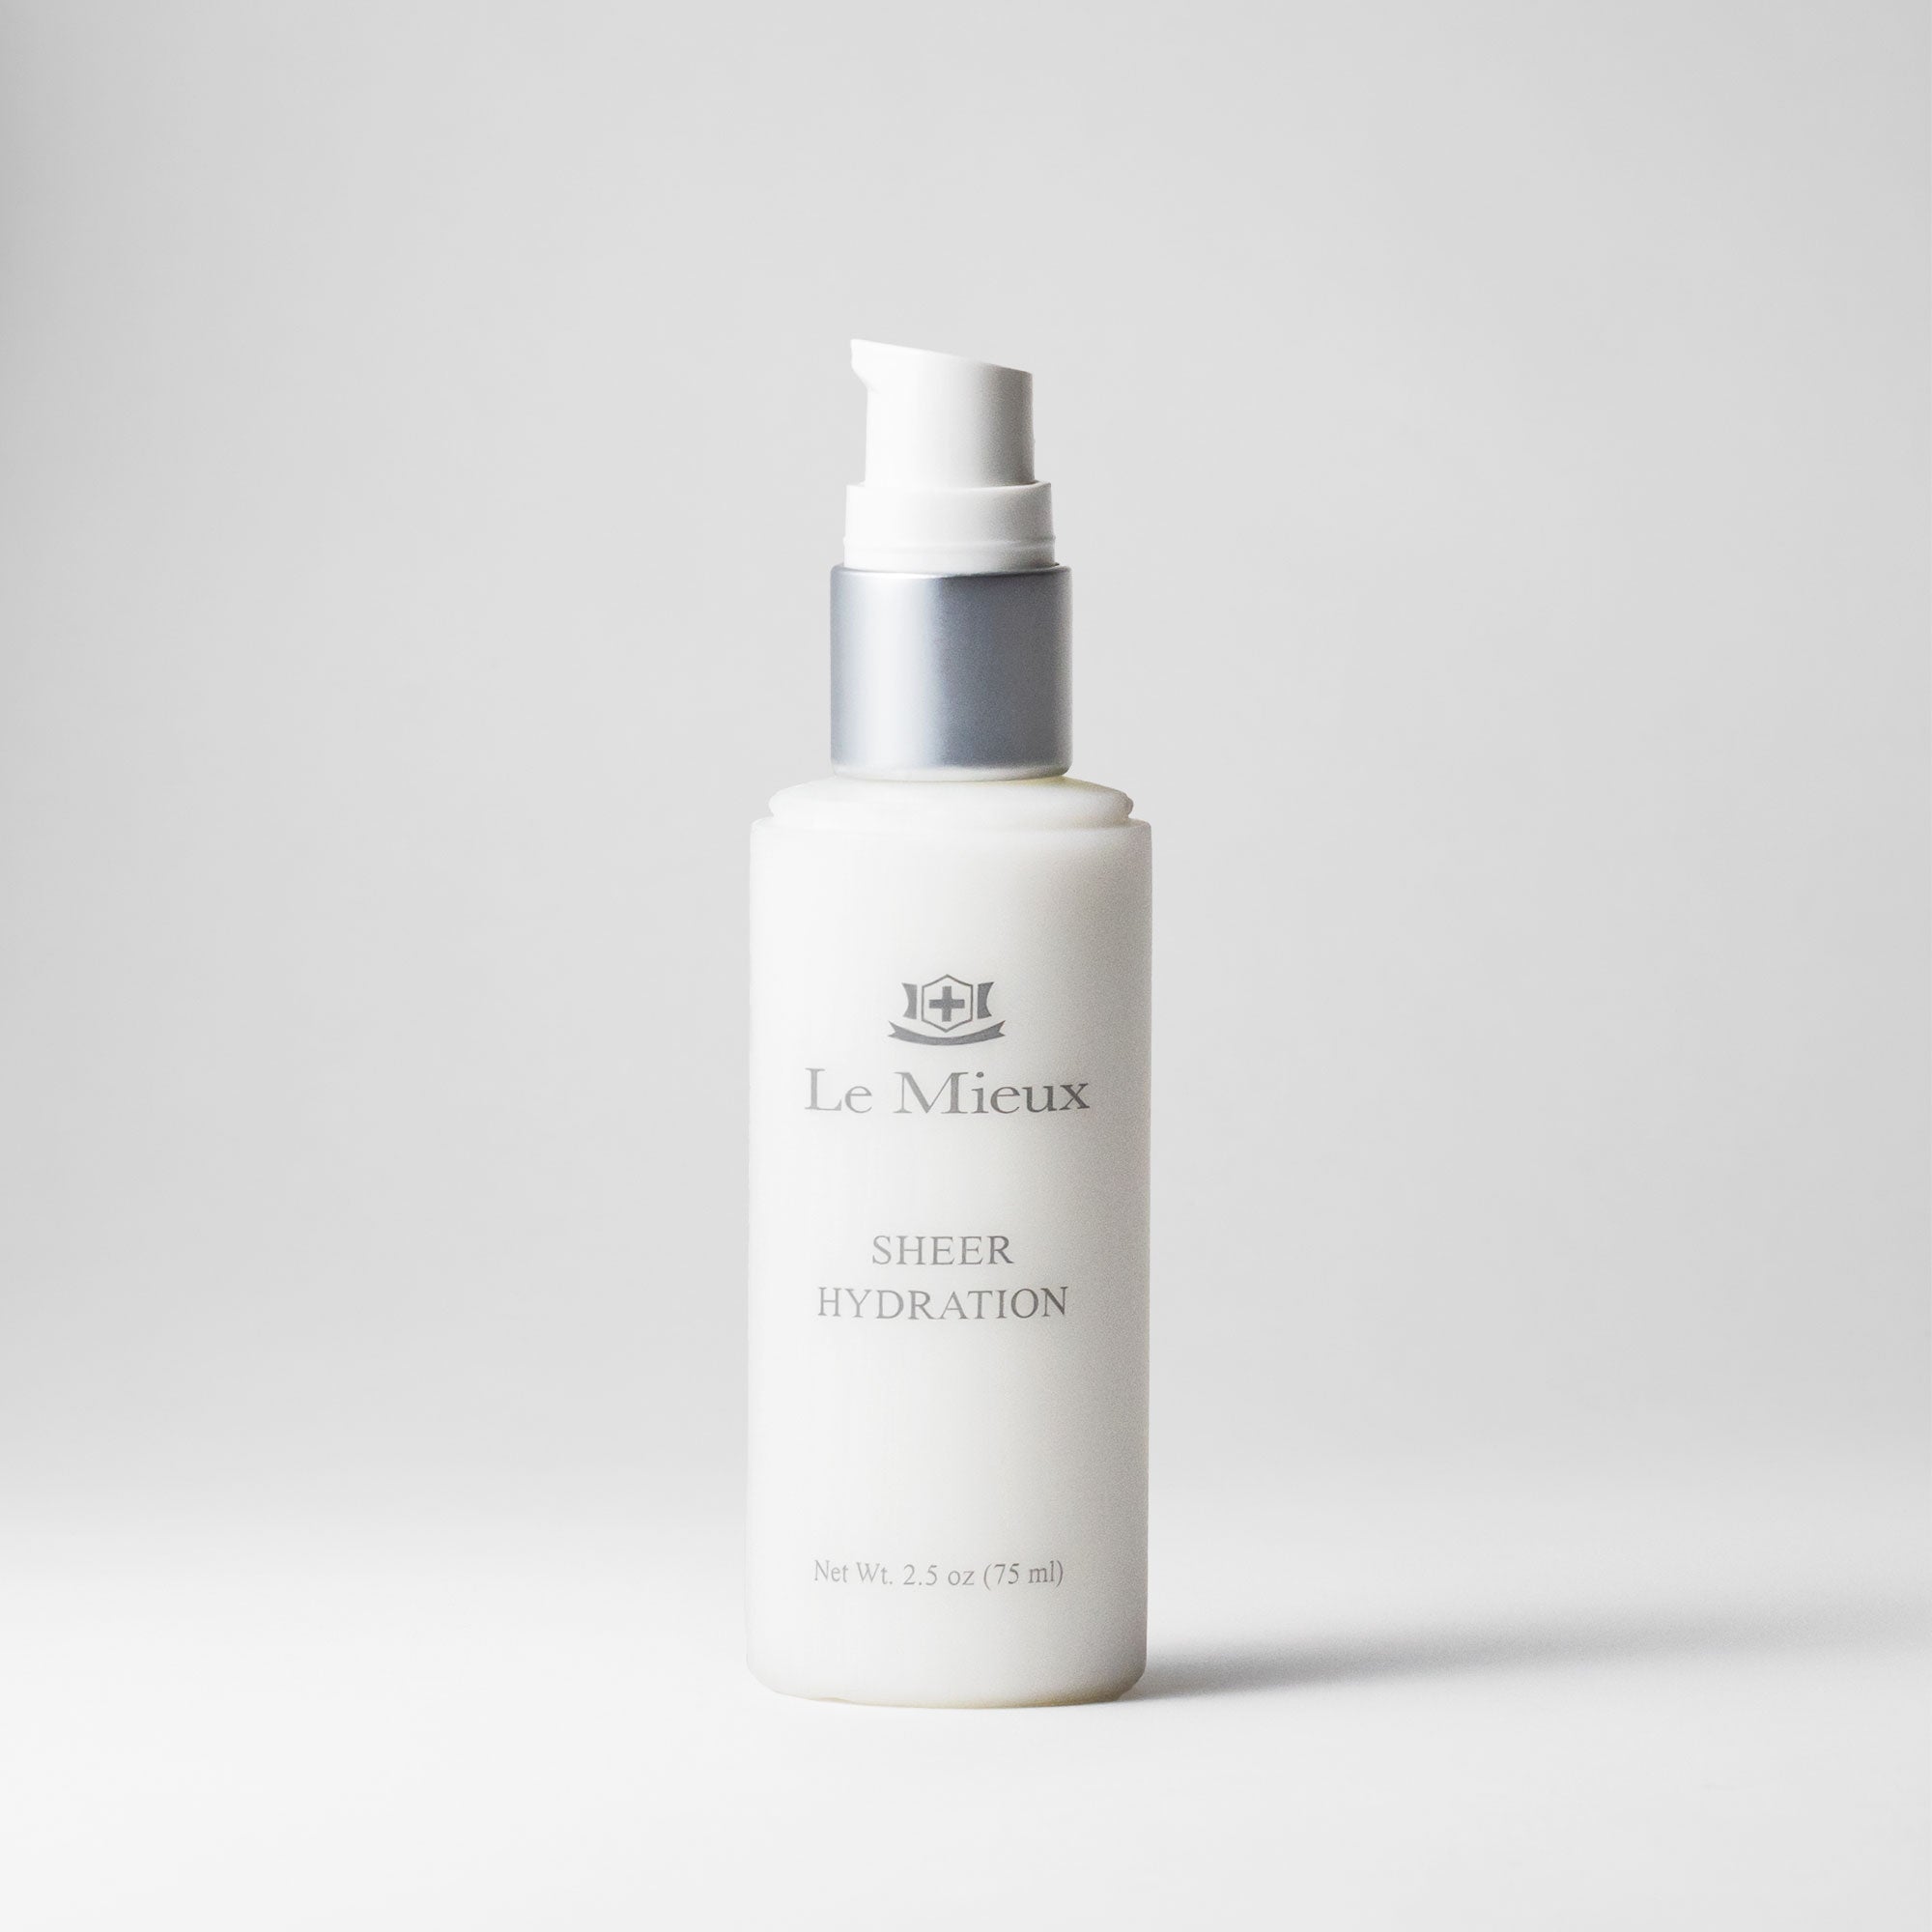  SHEER HYDRATION from Le Mieux Skincare - 2